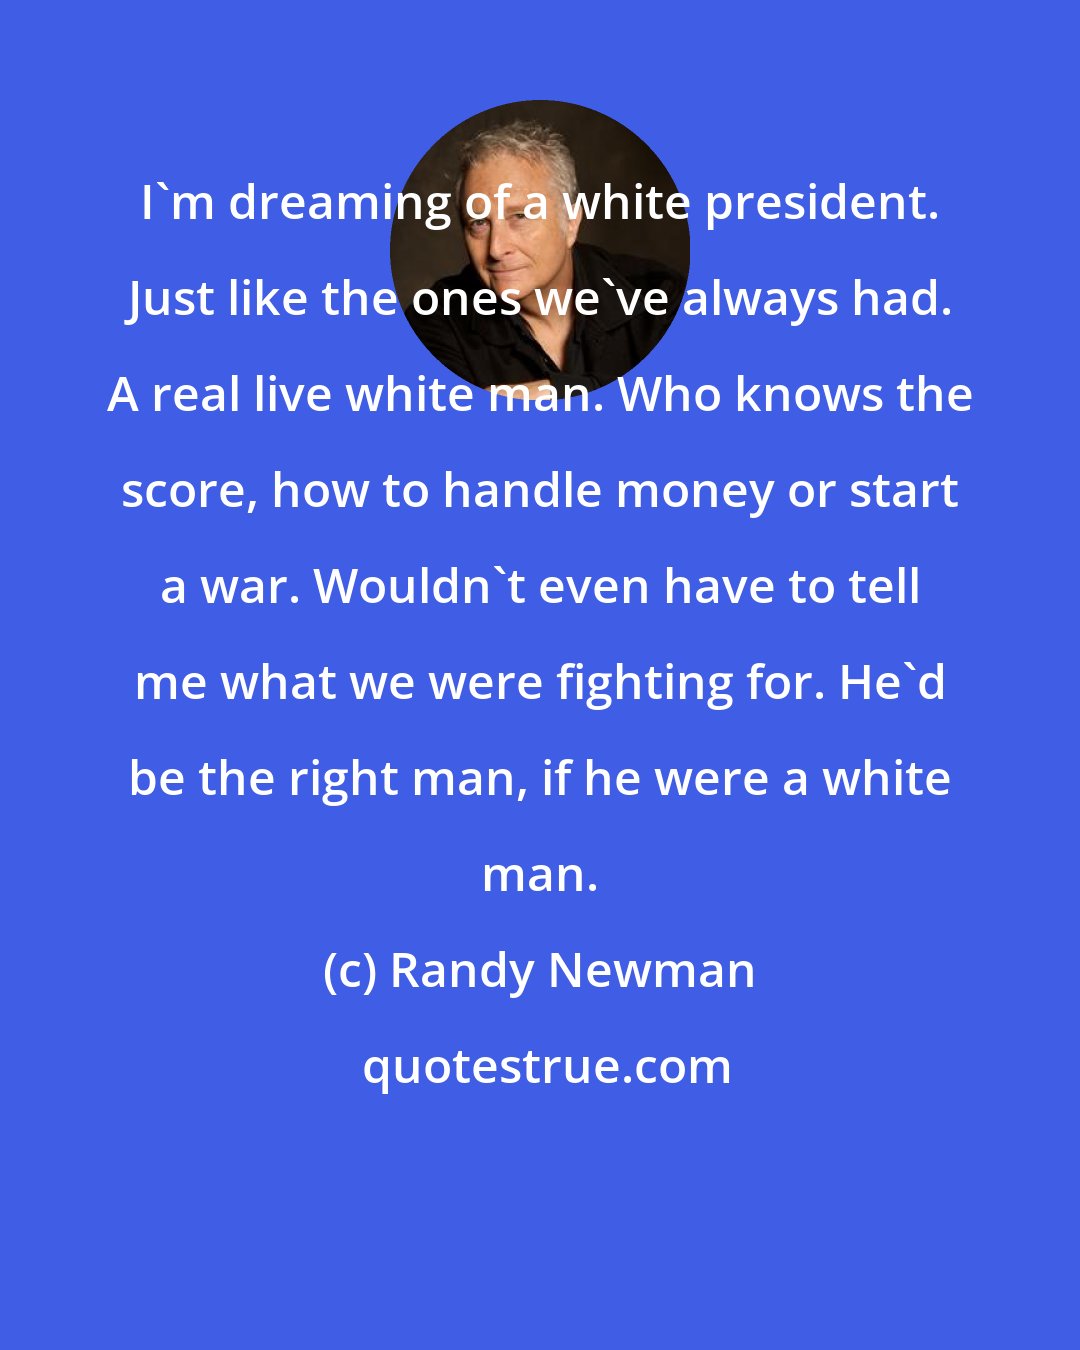 Randy Newman: I'm dreaming of a white president. Just like the ones we've always had. A real live white man. Who knows the score, how to handle money or start a war. Wouldn't even have to tell me what we were fighting for. He'd be the right man, if he were a white man.